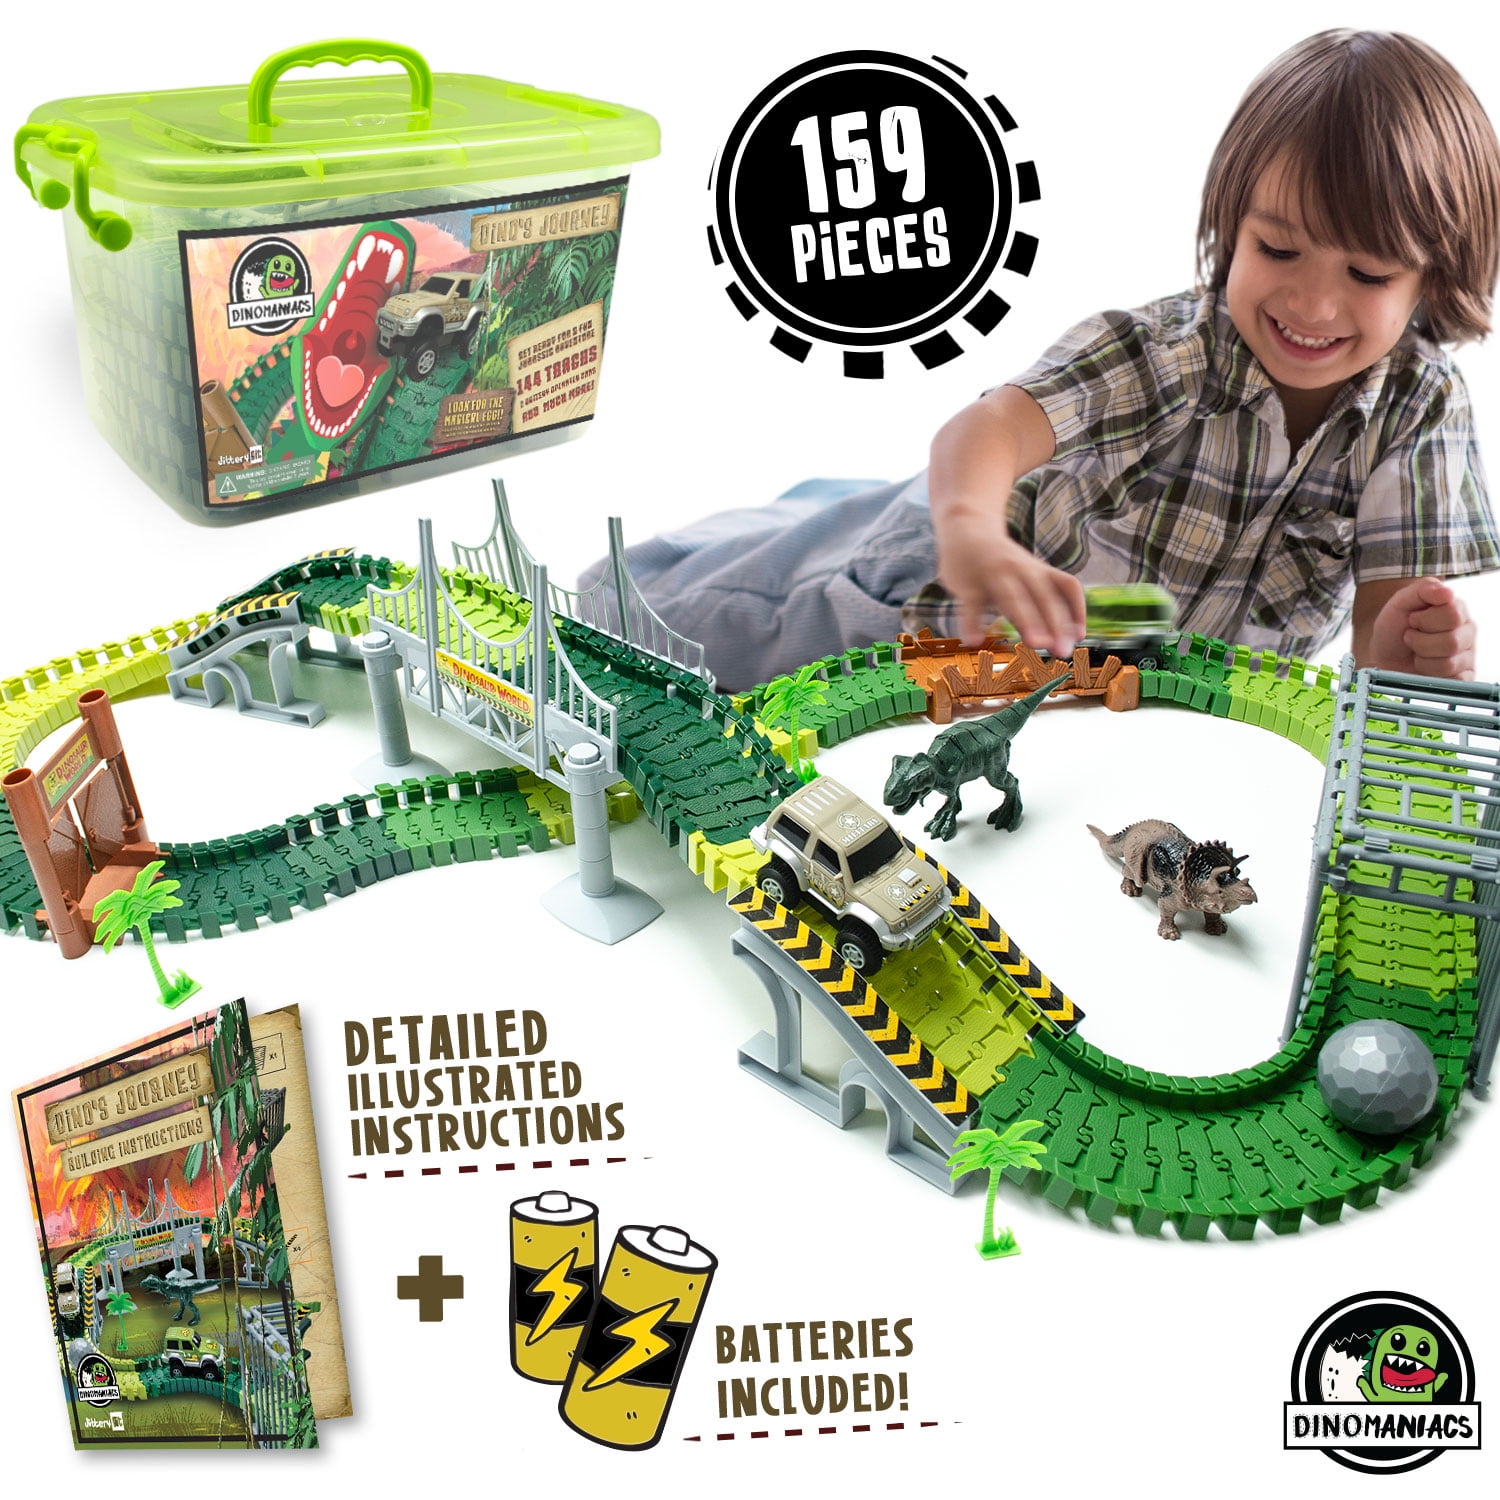 Dinosaur Toys Track For Boys and Girls - STEM Toys Activities for 